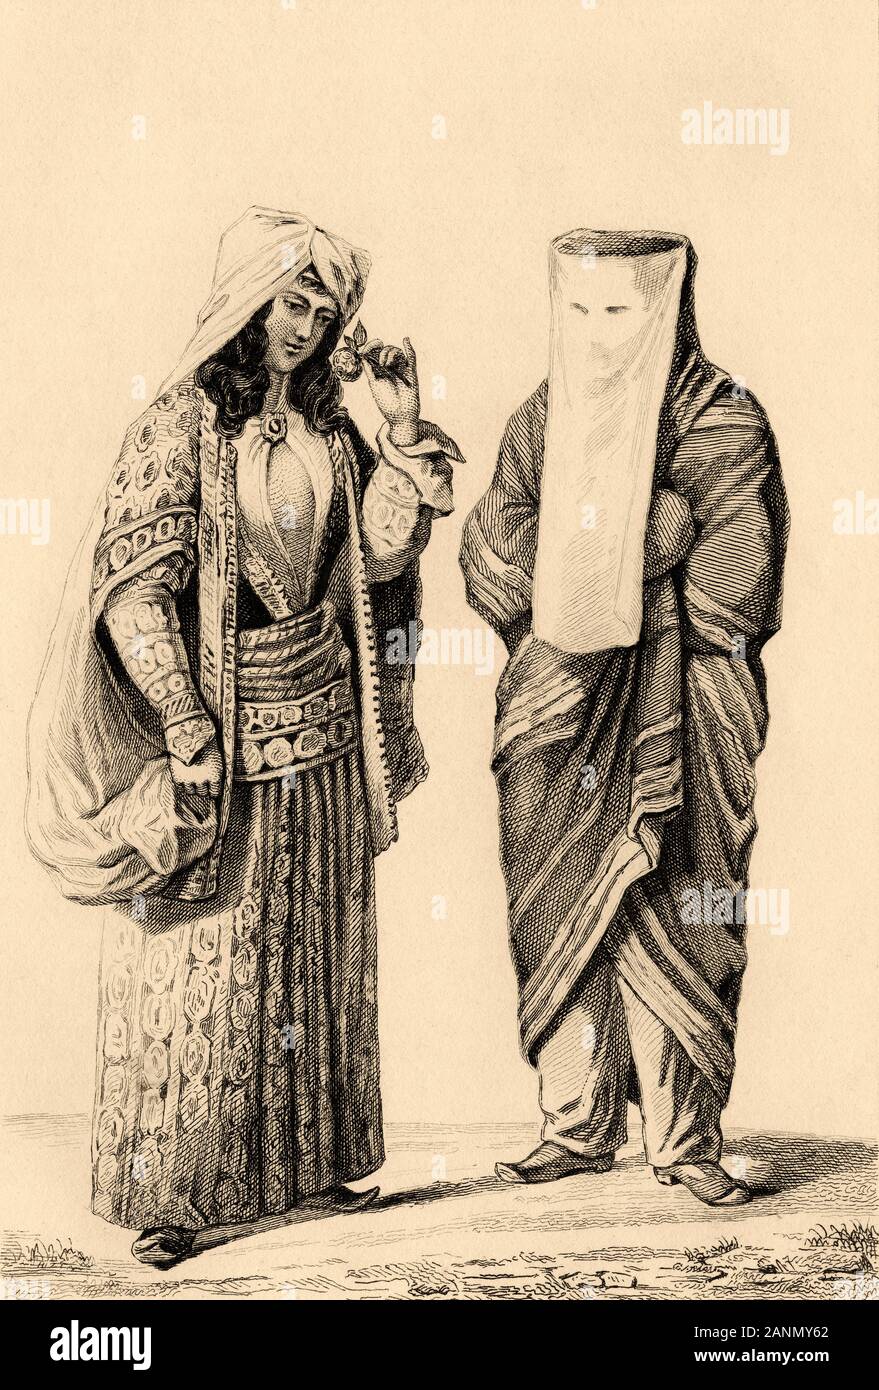 Costumes typical of Persian women, one dressed as the harem and the other with a veil covering her face. Iran. Old steel engraved antique print. Publi Stock Photo